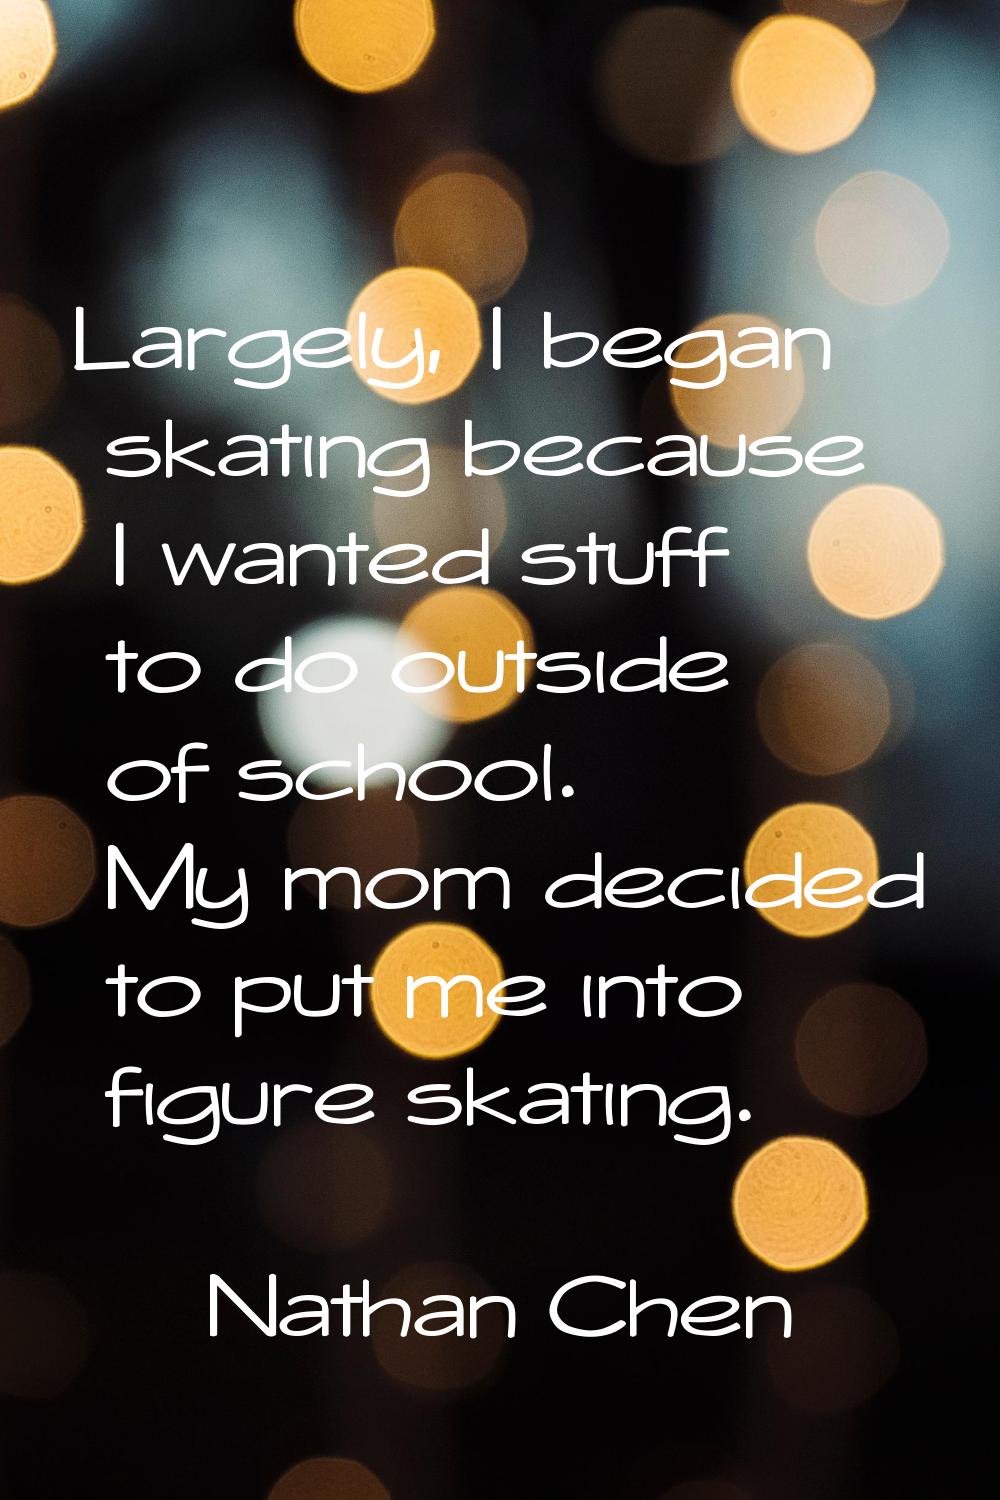 Largely, I began skating because I wanted stuff to do outside of school. My mom decided to put me i